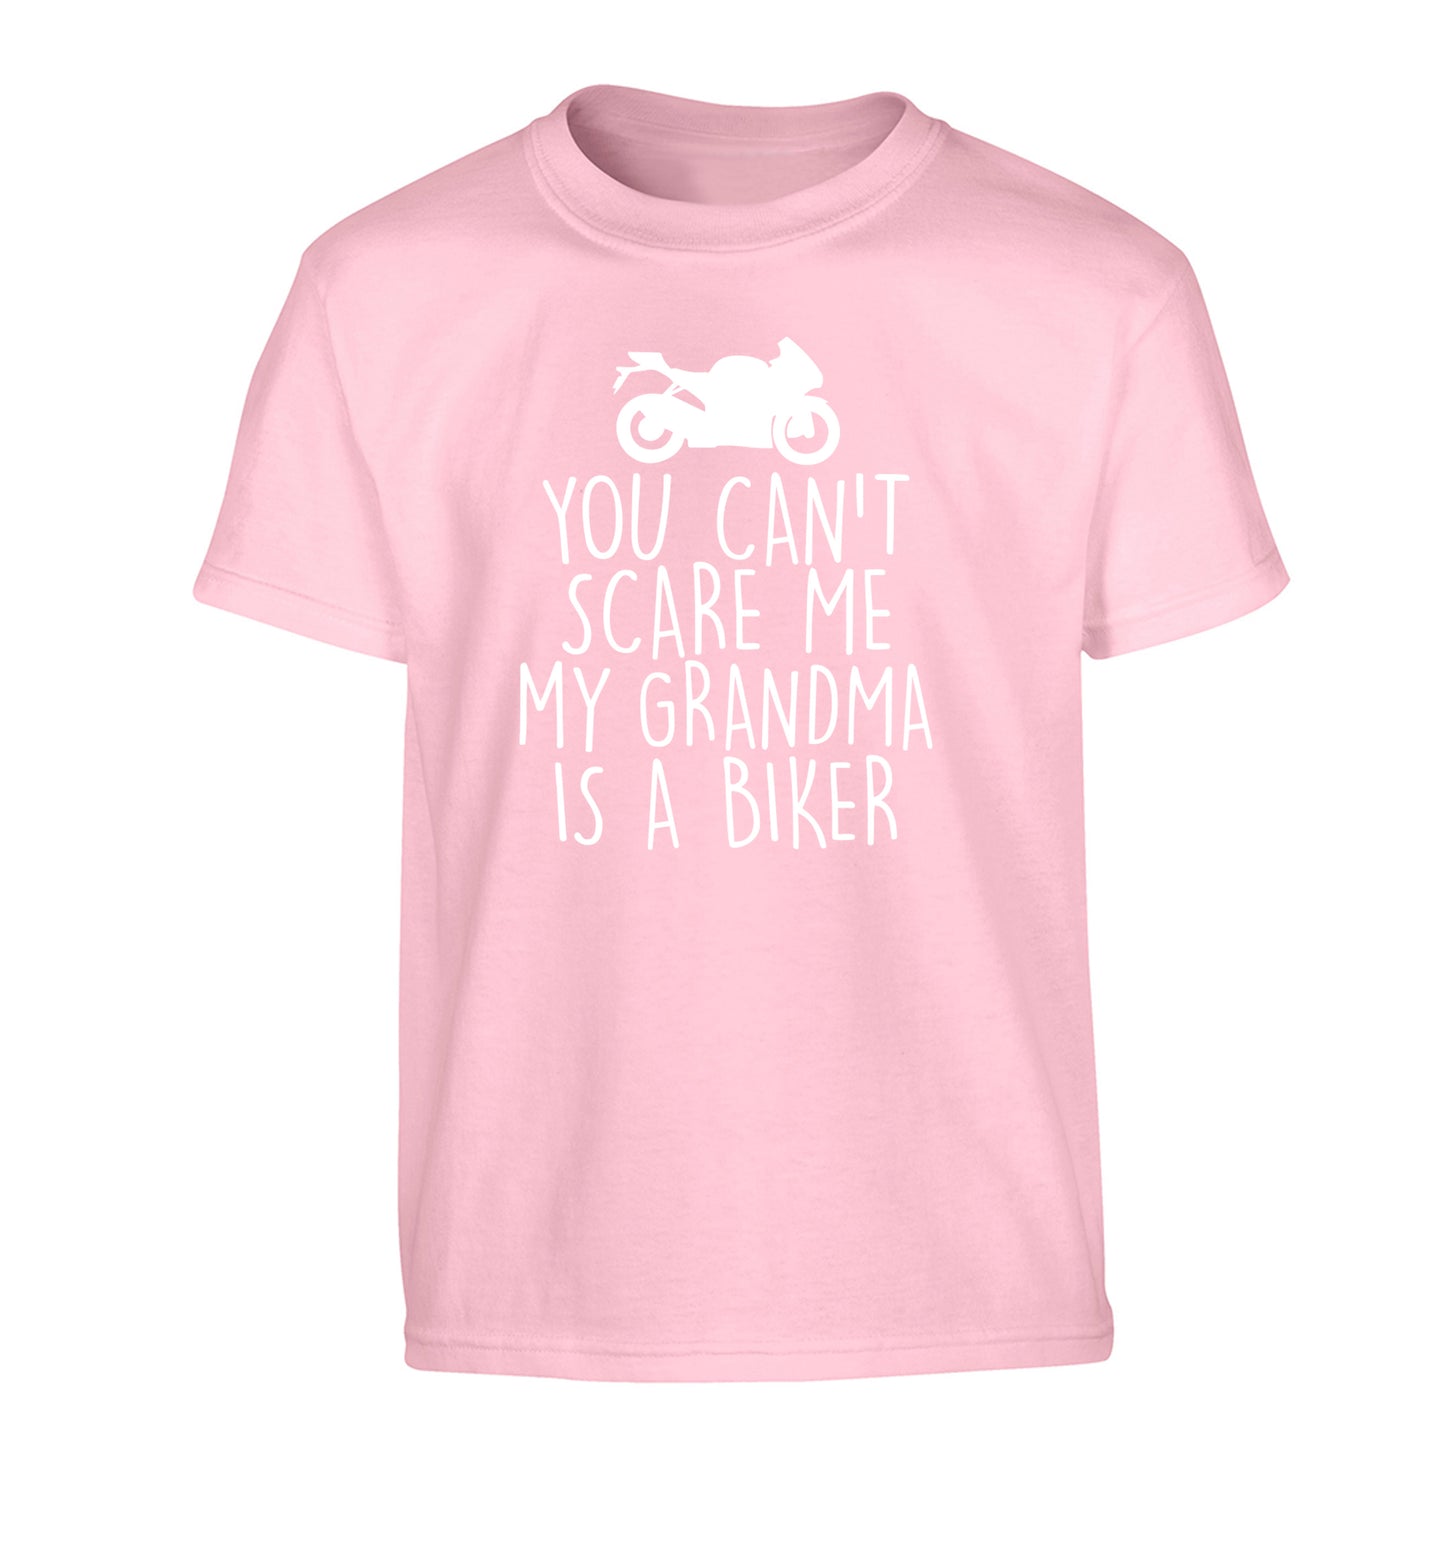 You can't scare me my grandma is a biker Children's light pink Tshirt 12-13 Years